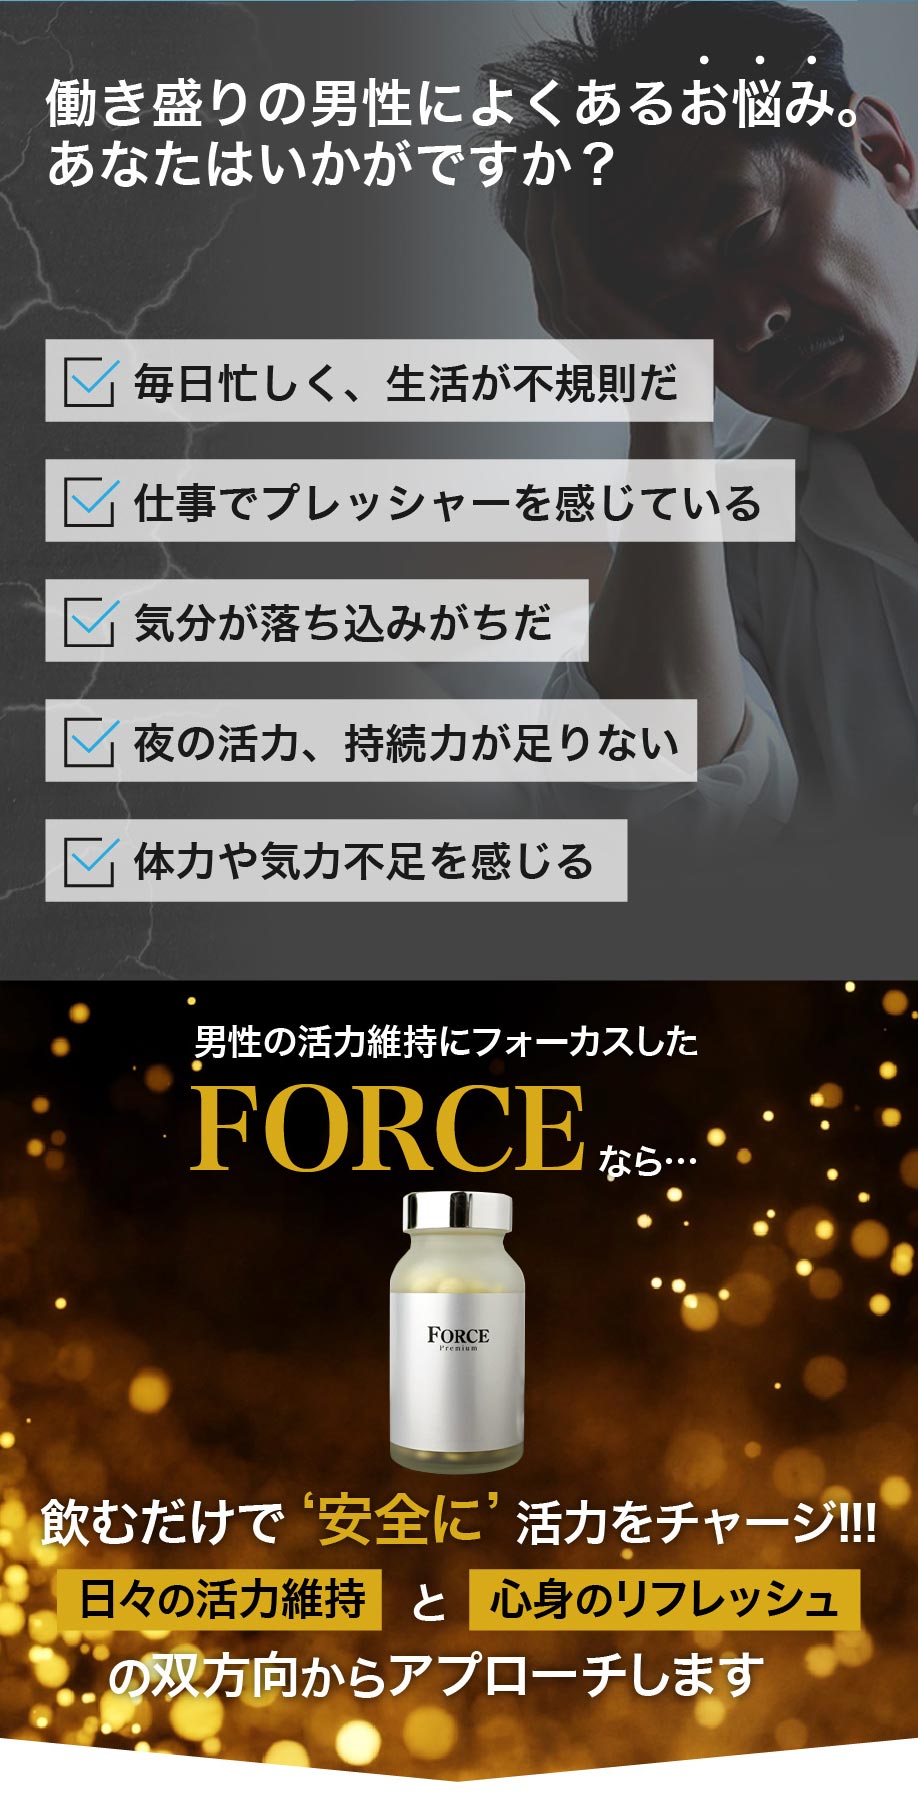 FORCE商品のご案内02